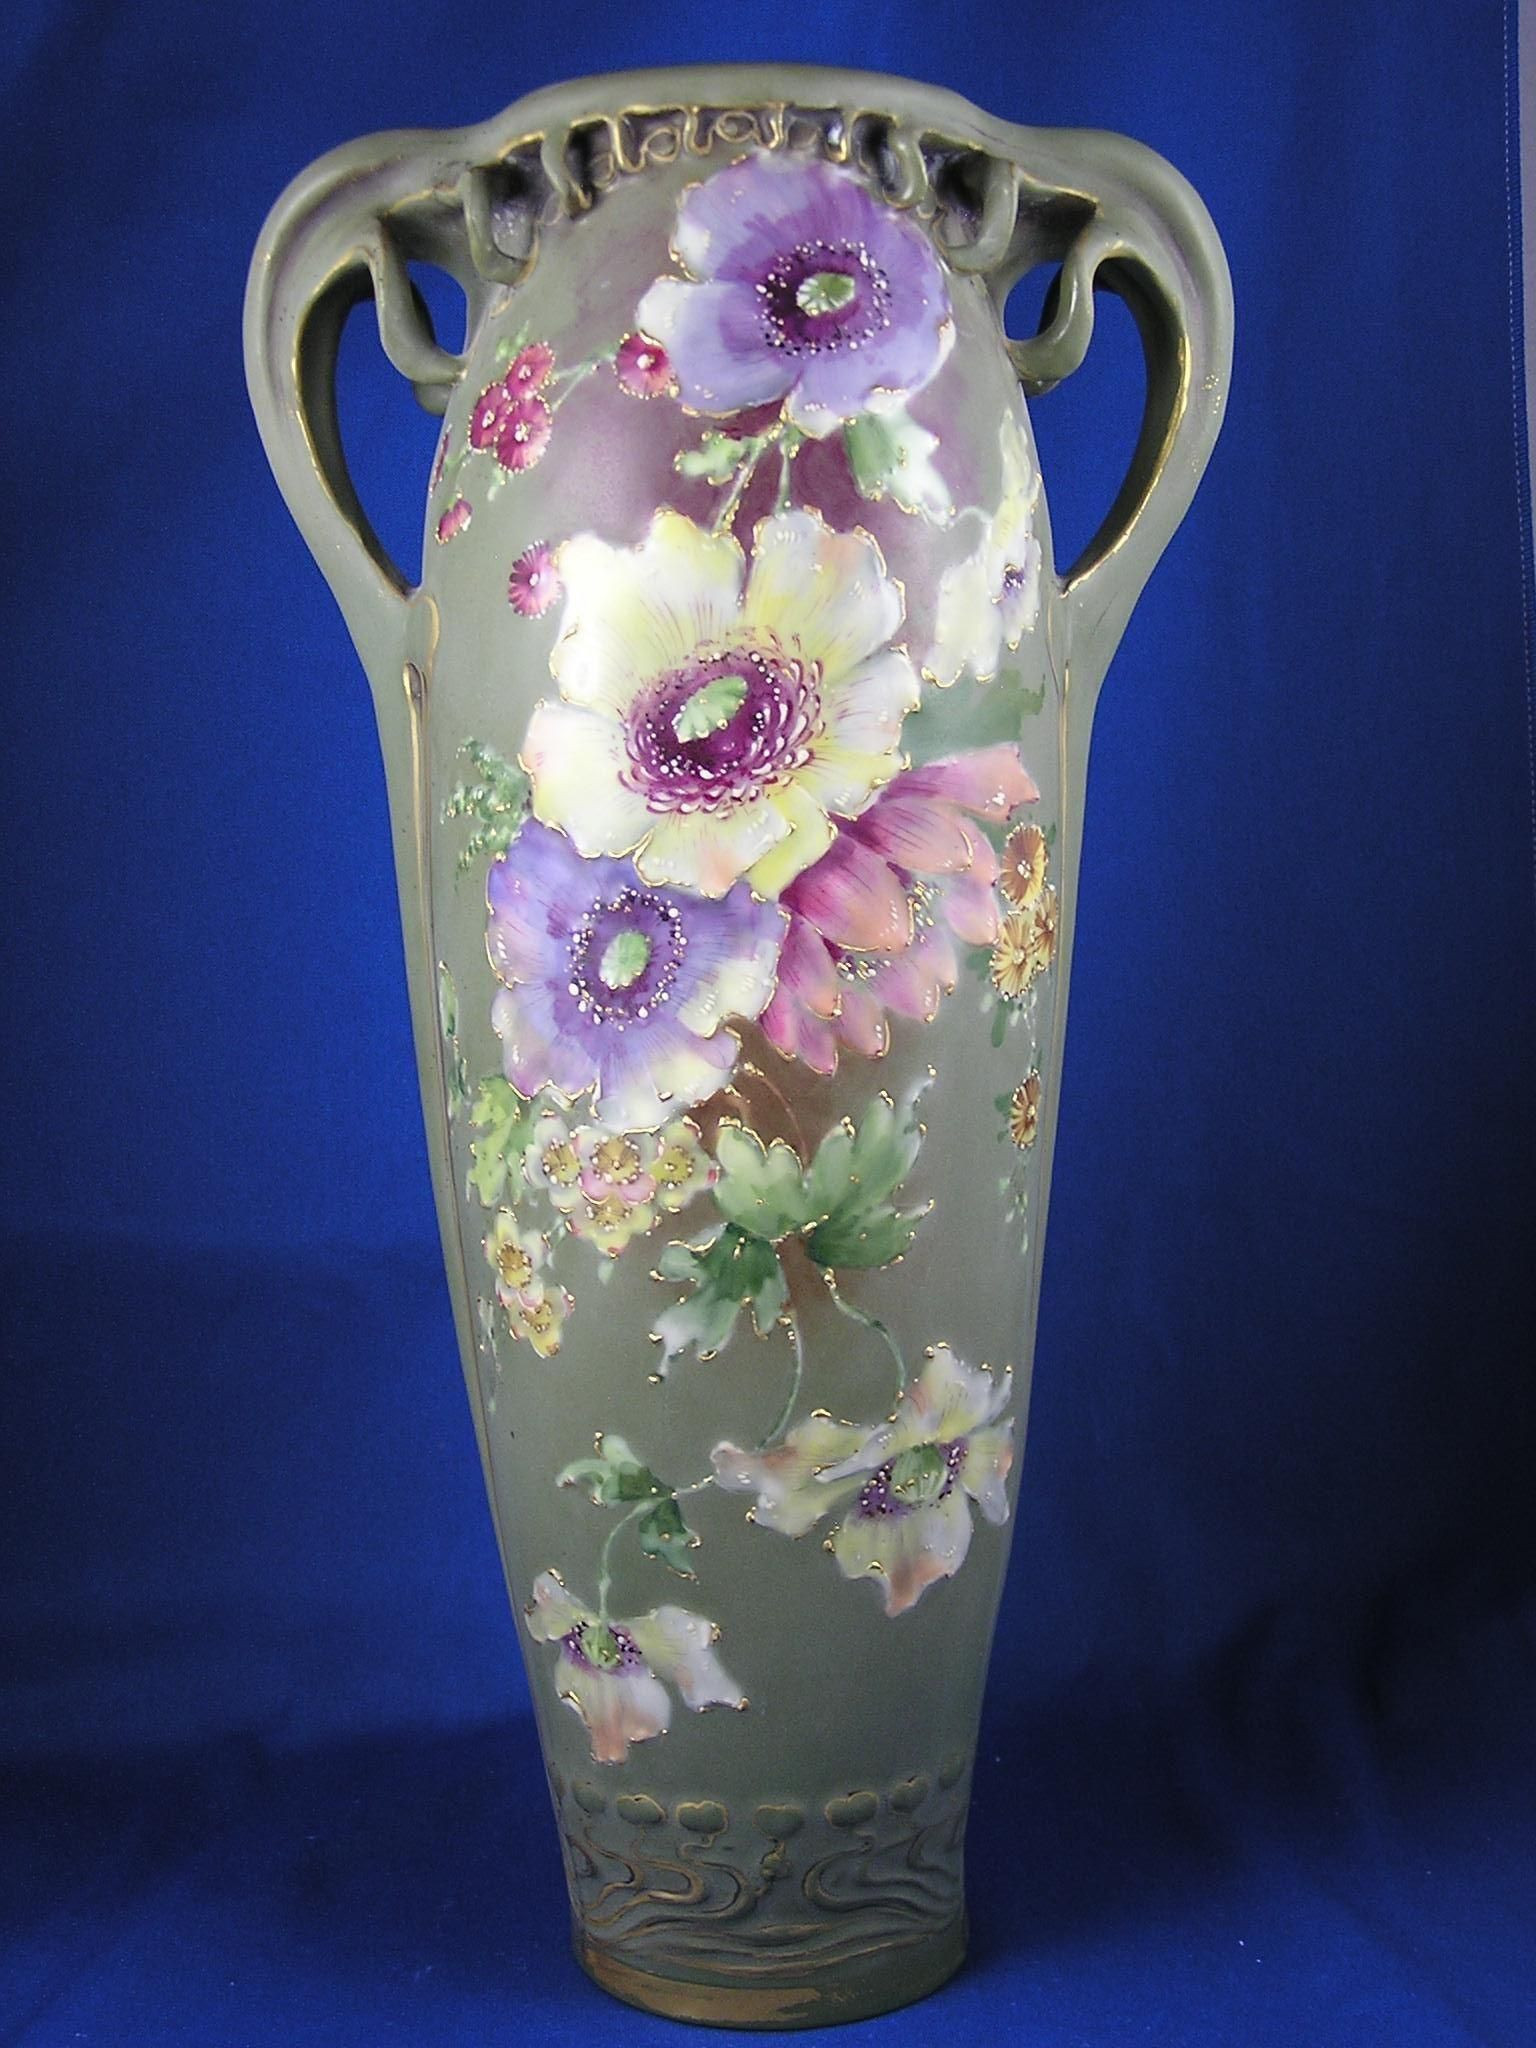 21 attractive Polymer Clay Vase 2024 free download polymer clay vase of clay vase designs image rstk amphora austria art nouveau enameled within clay vase designs image rstk amphora austria art nouveau enameled floral design vase c 1899